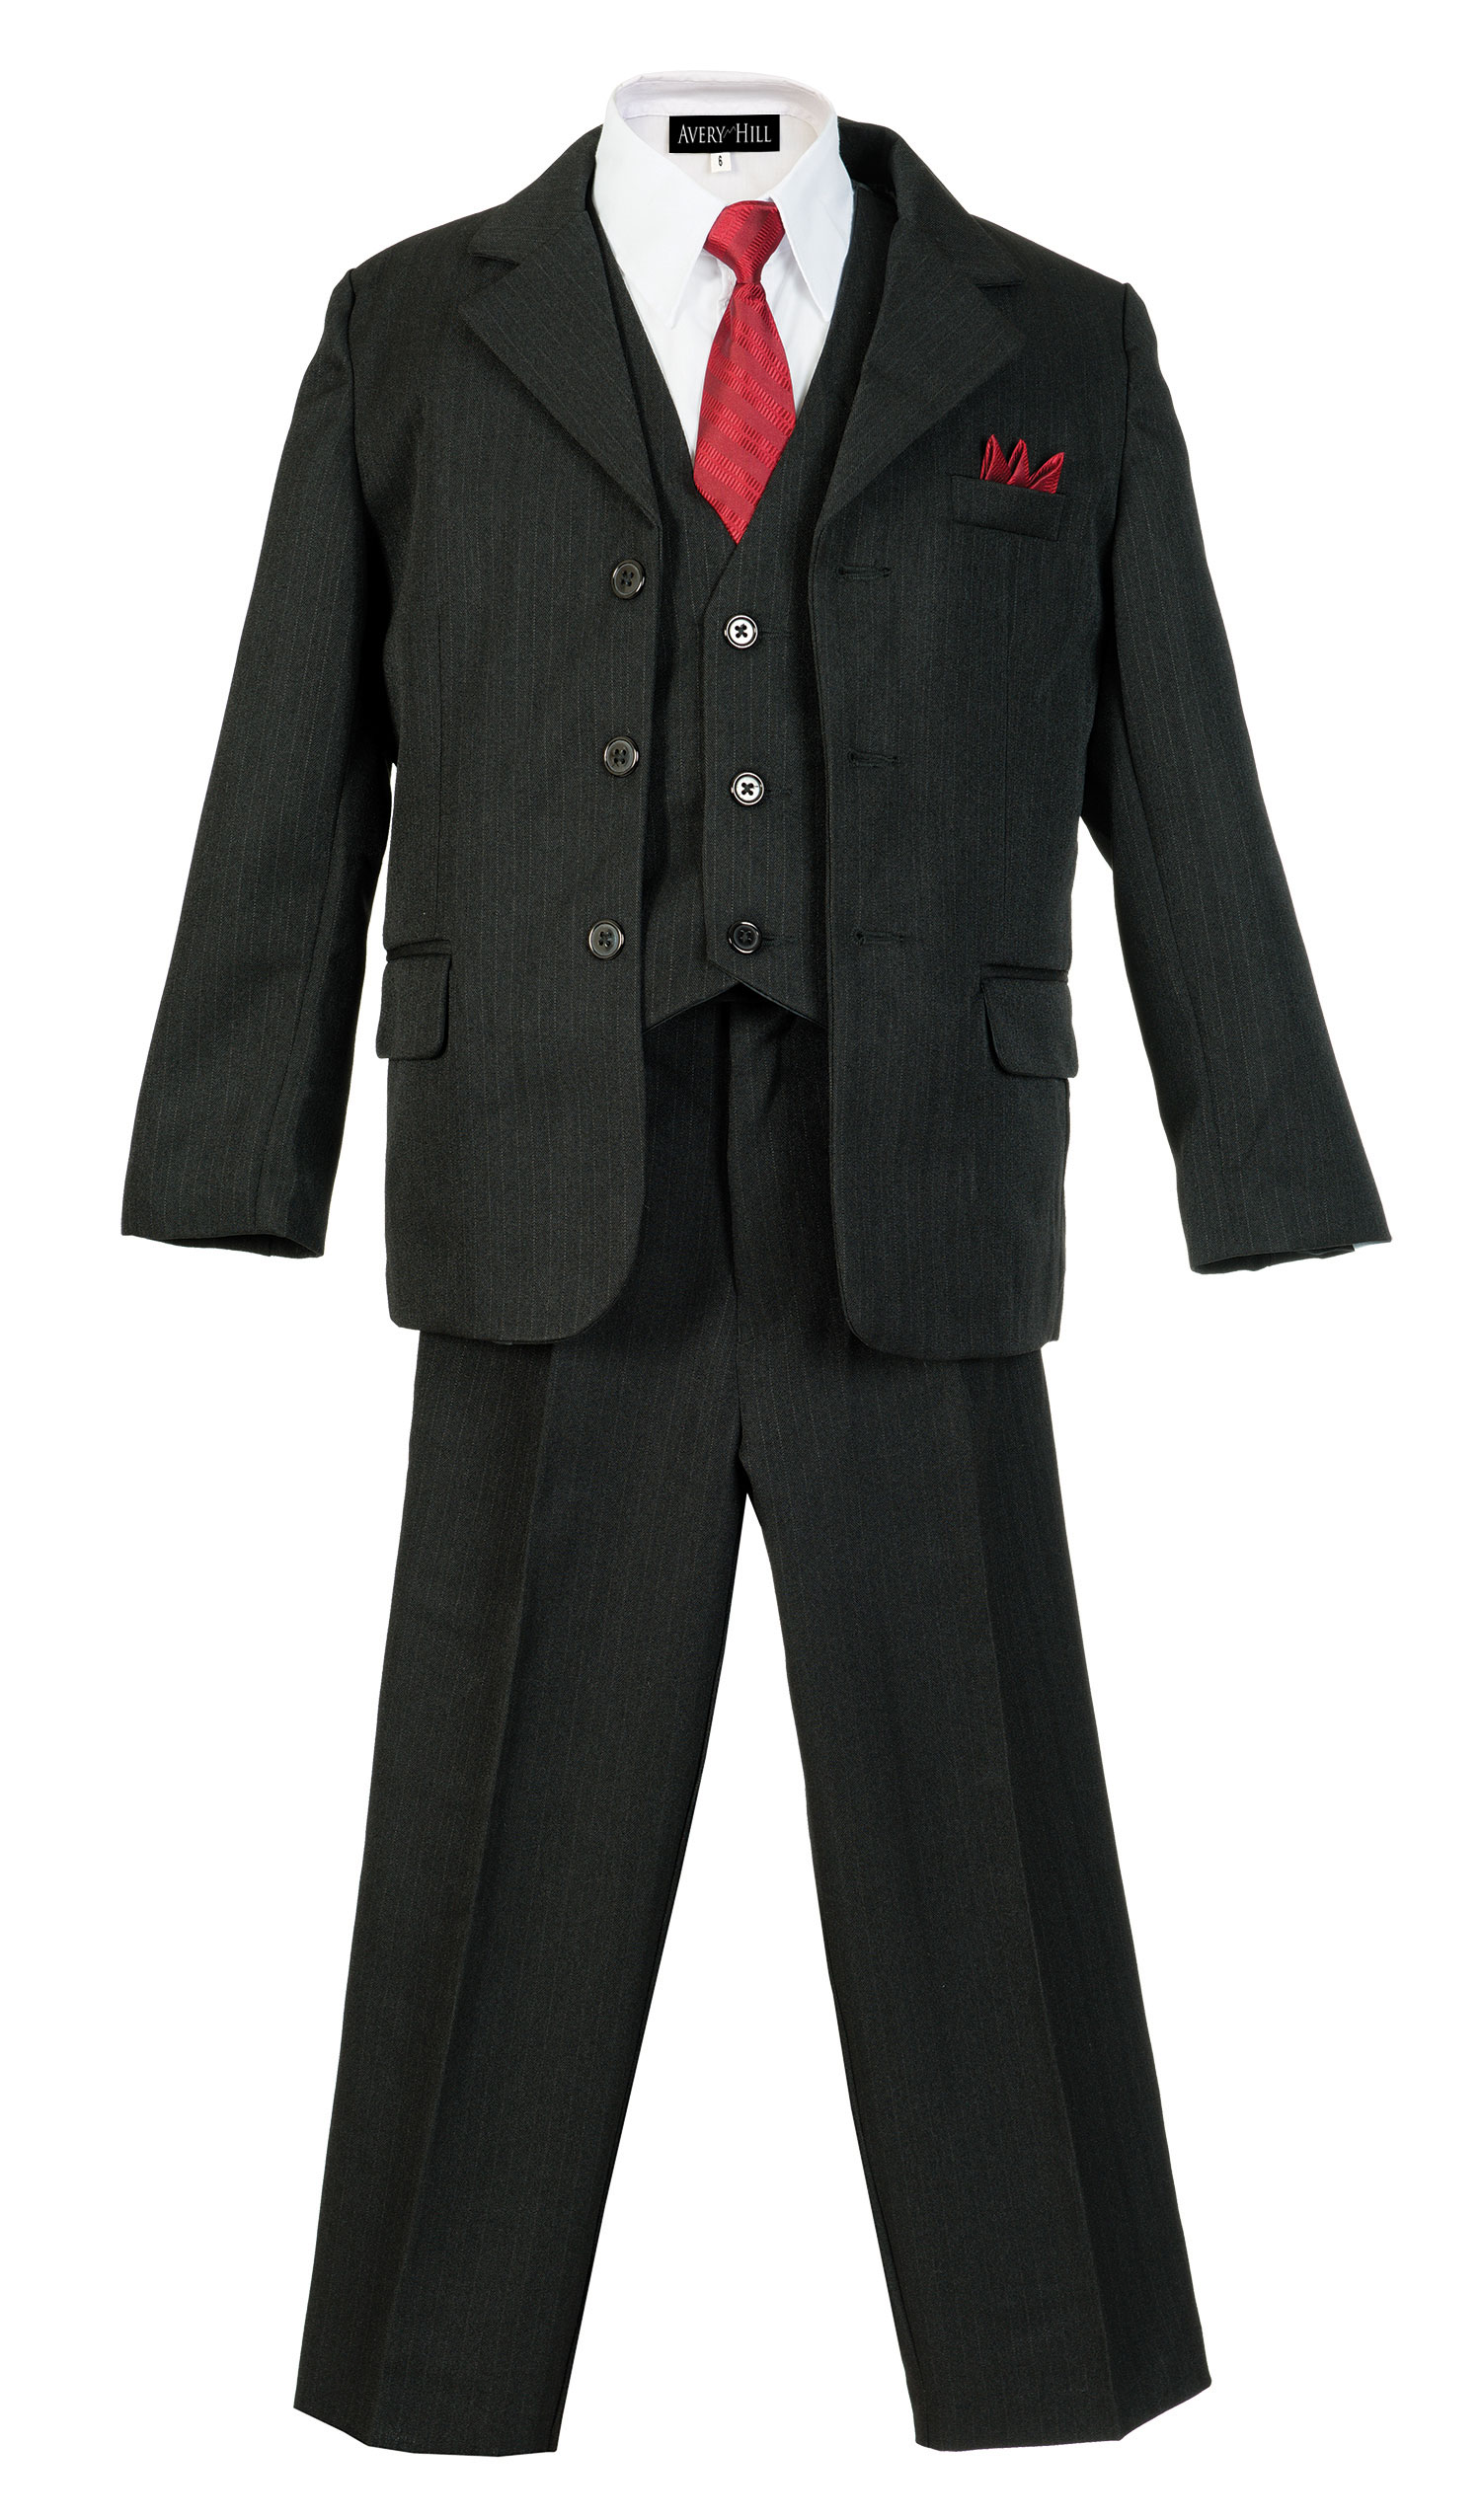 Boys Pinstripe Suit Set with Matching Tie BK 3T